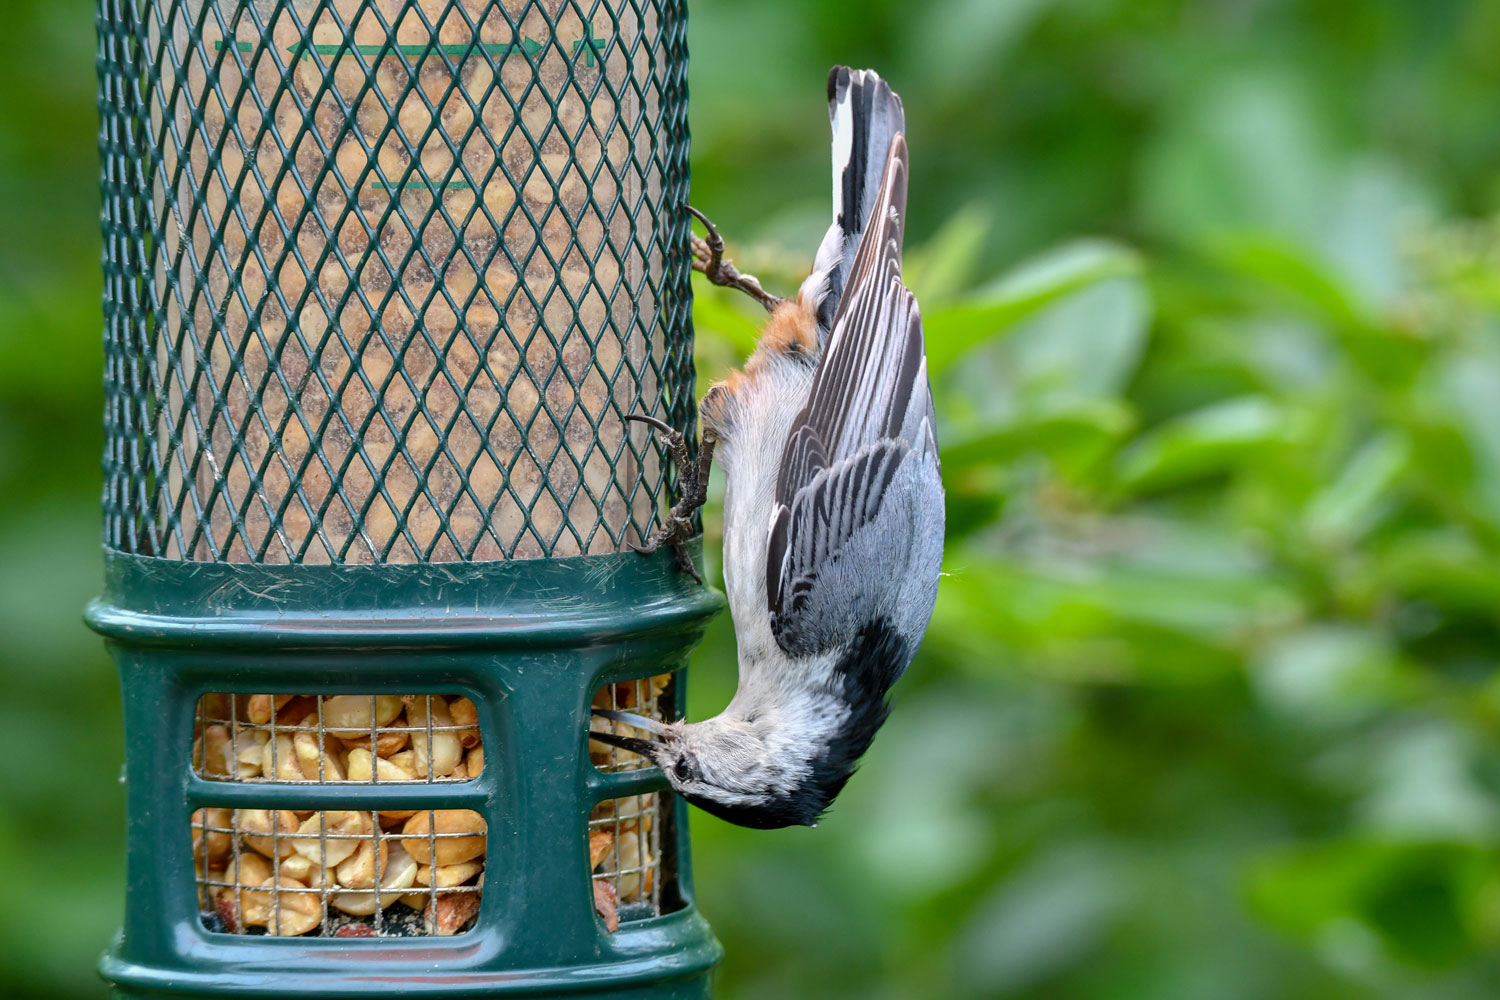 White-breasted nuthatch eating on a feeder